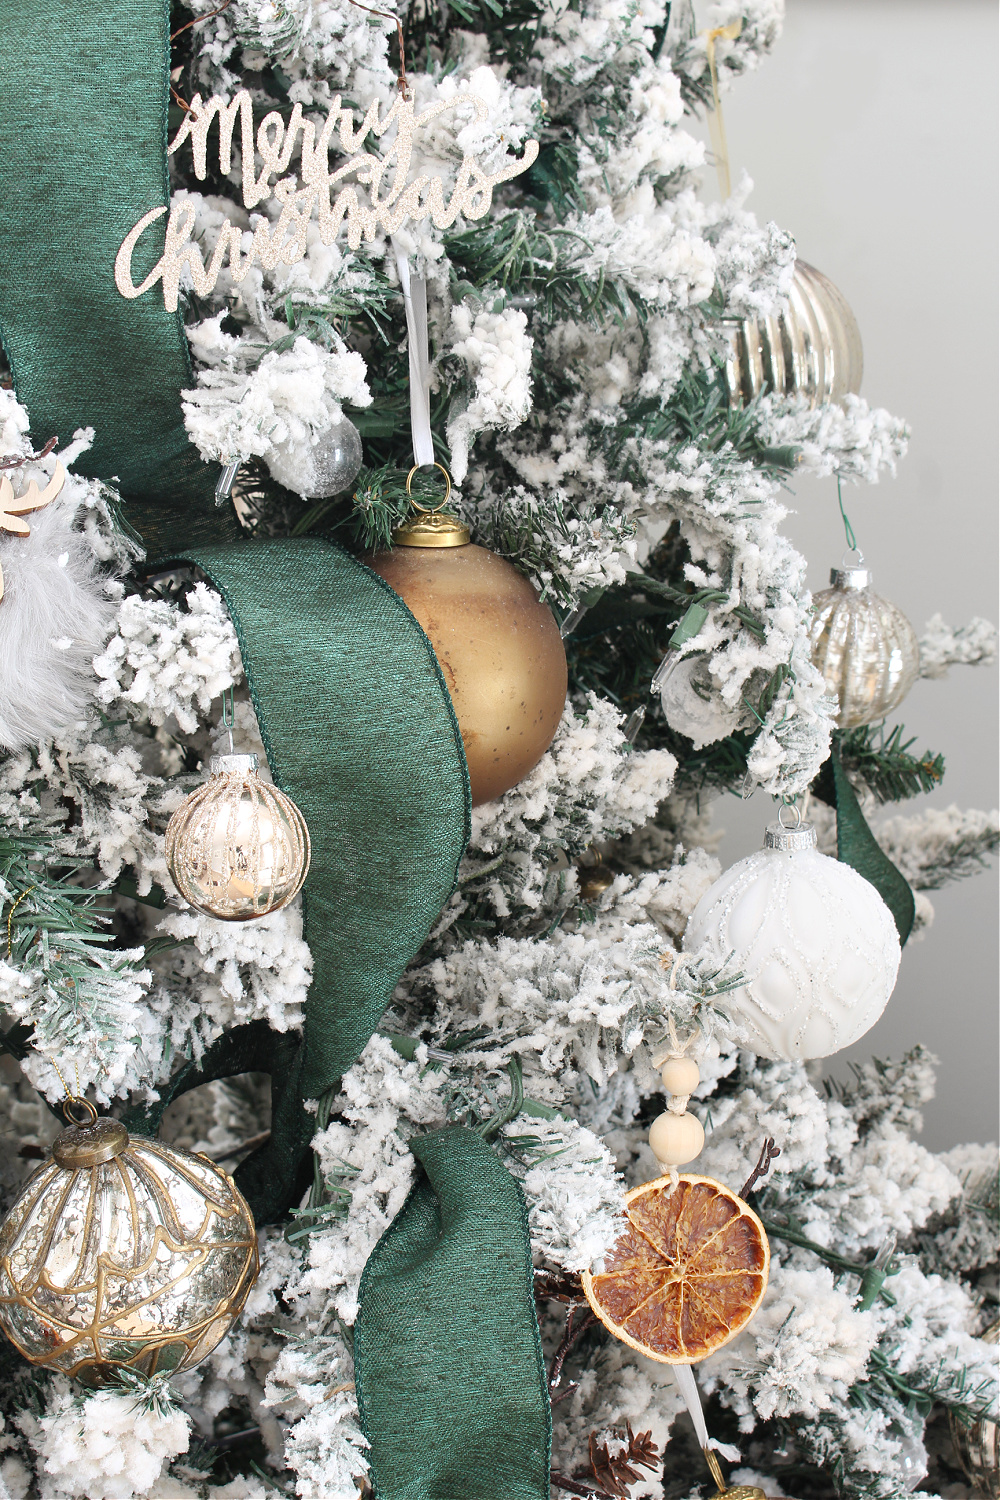 A Christmas tree decorated with metallic and dry oranges.